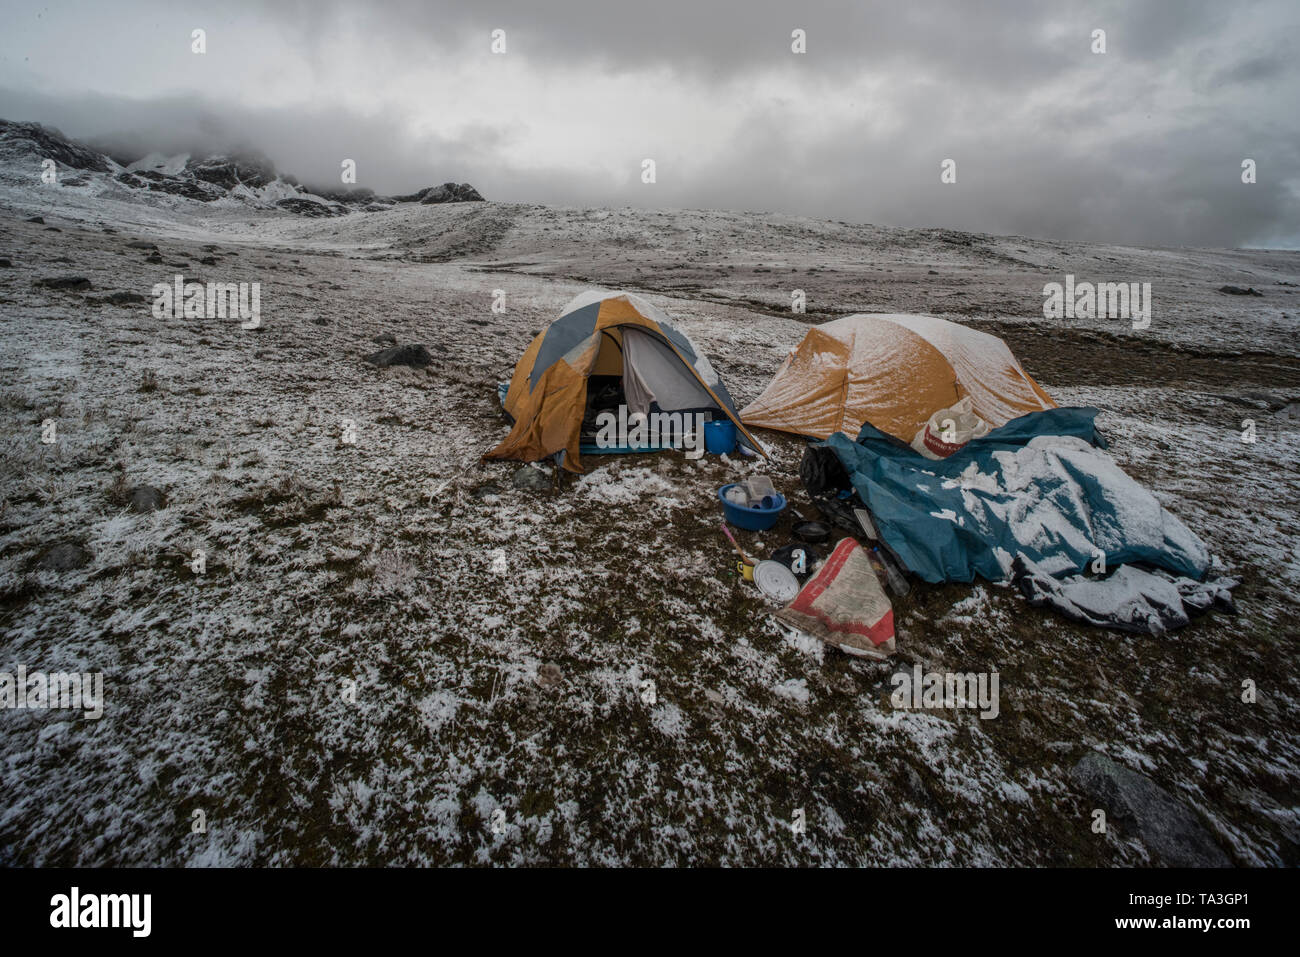 Cold weather camping in the puna grassland high in the Andes mountains in Southern Peru. Stock Photo